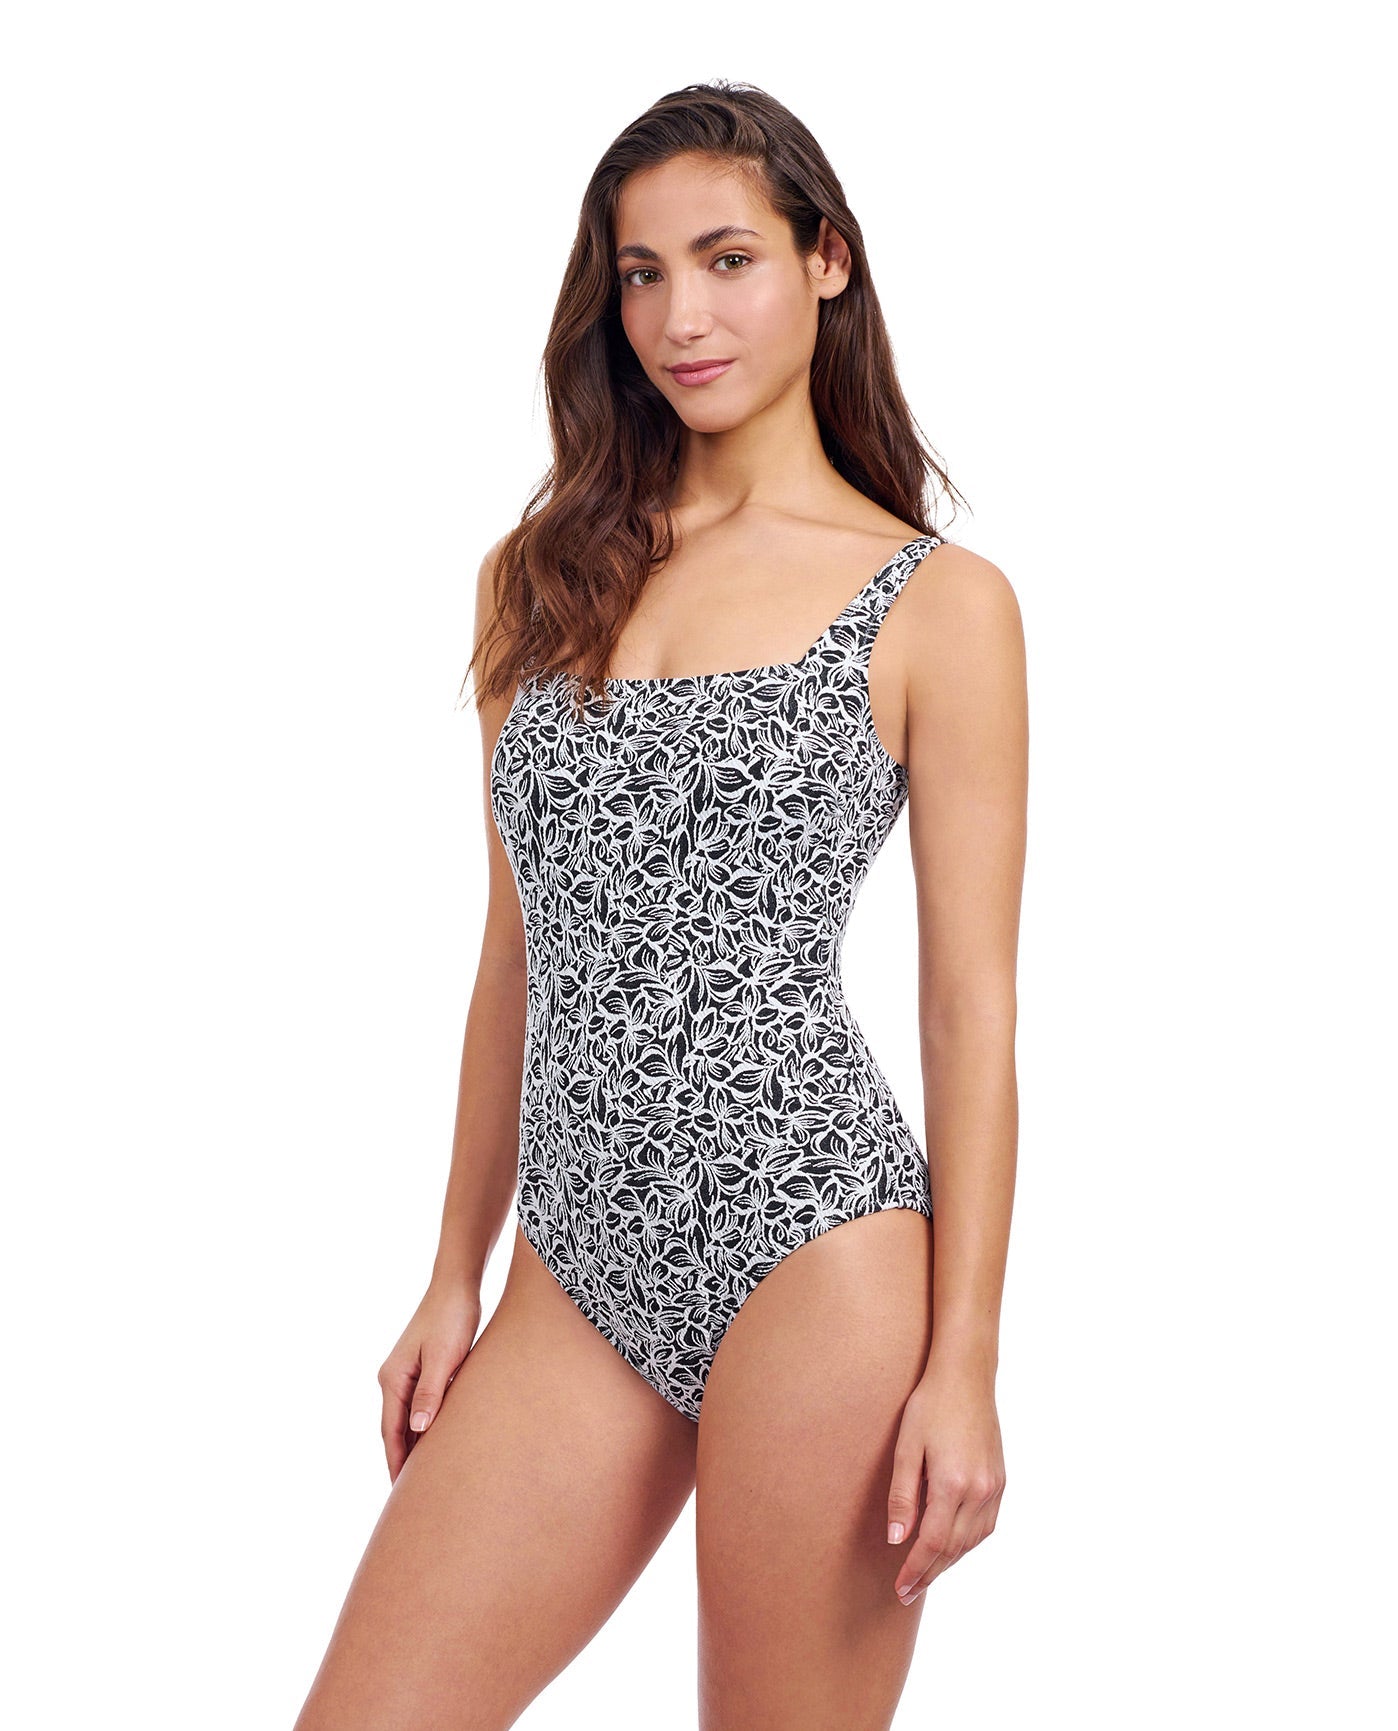 Side View of Profile By Gottex Plumeria Textured Square Neck One Piece Swimsuit | PROFILE PLUMERIA BLACK AND WHITE